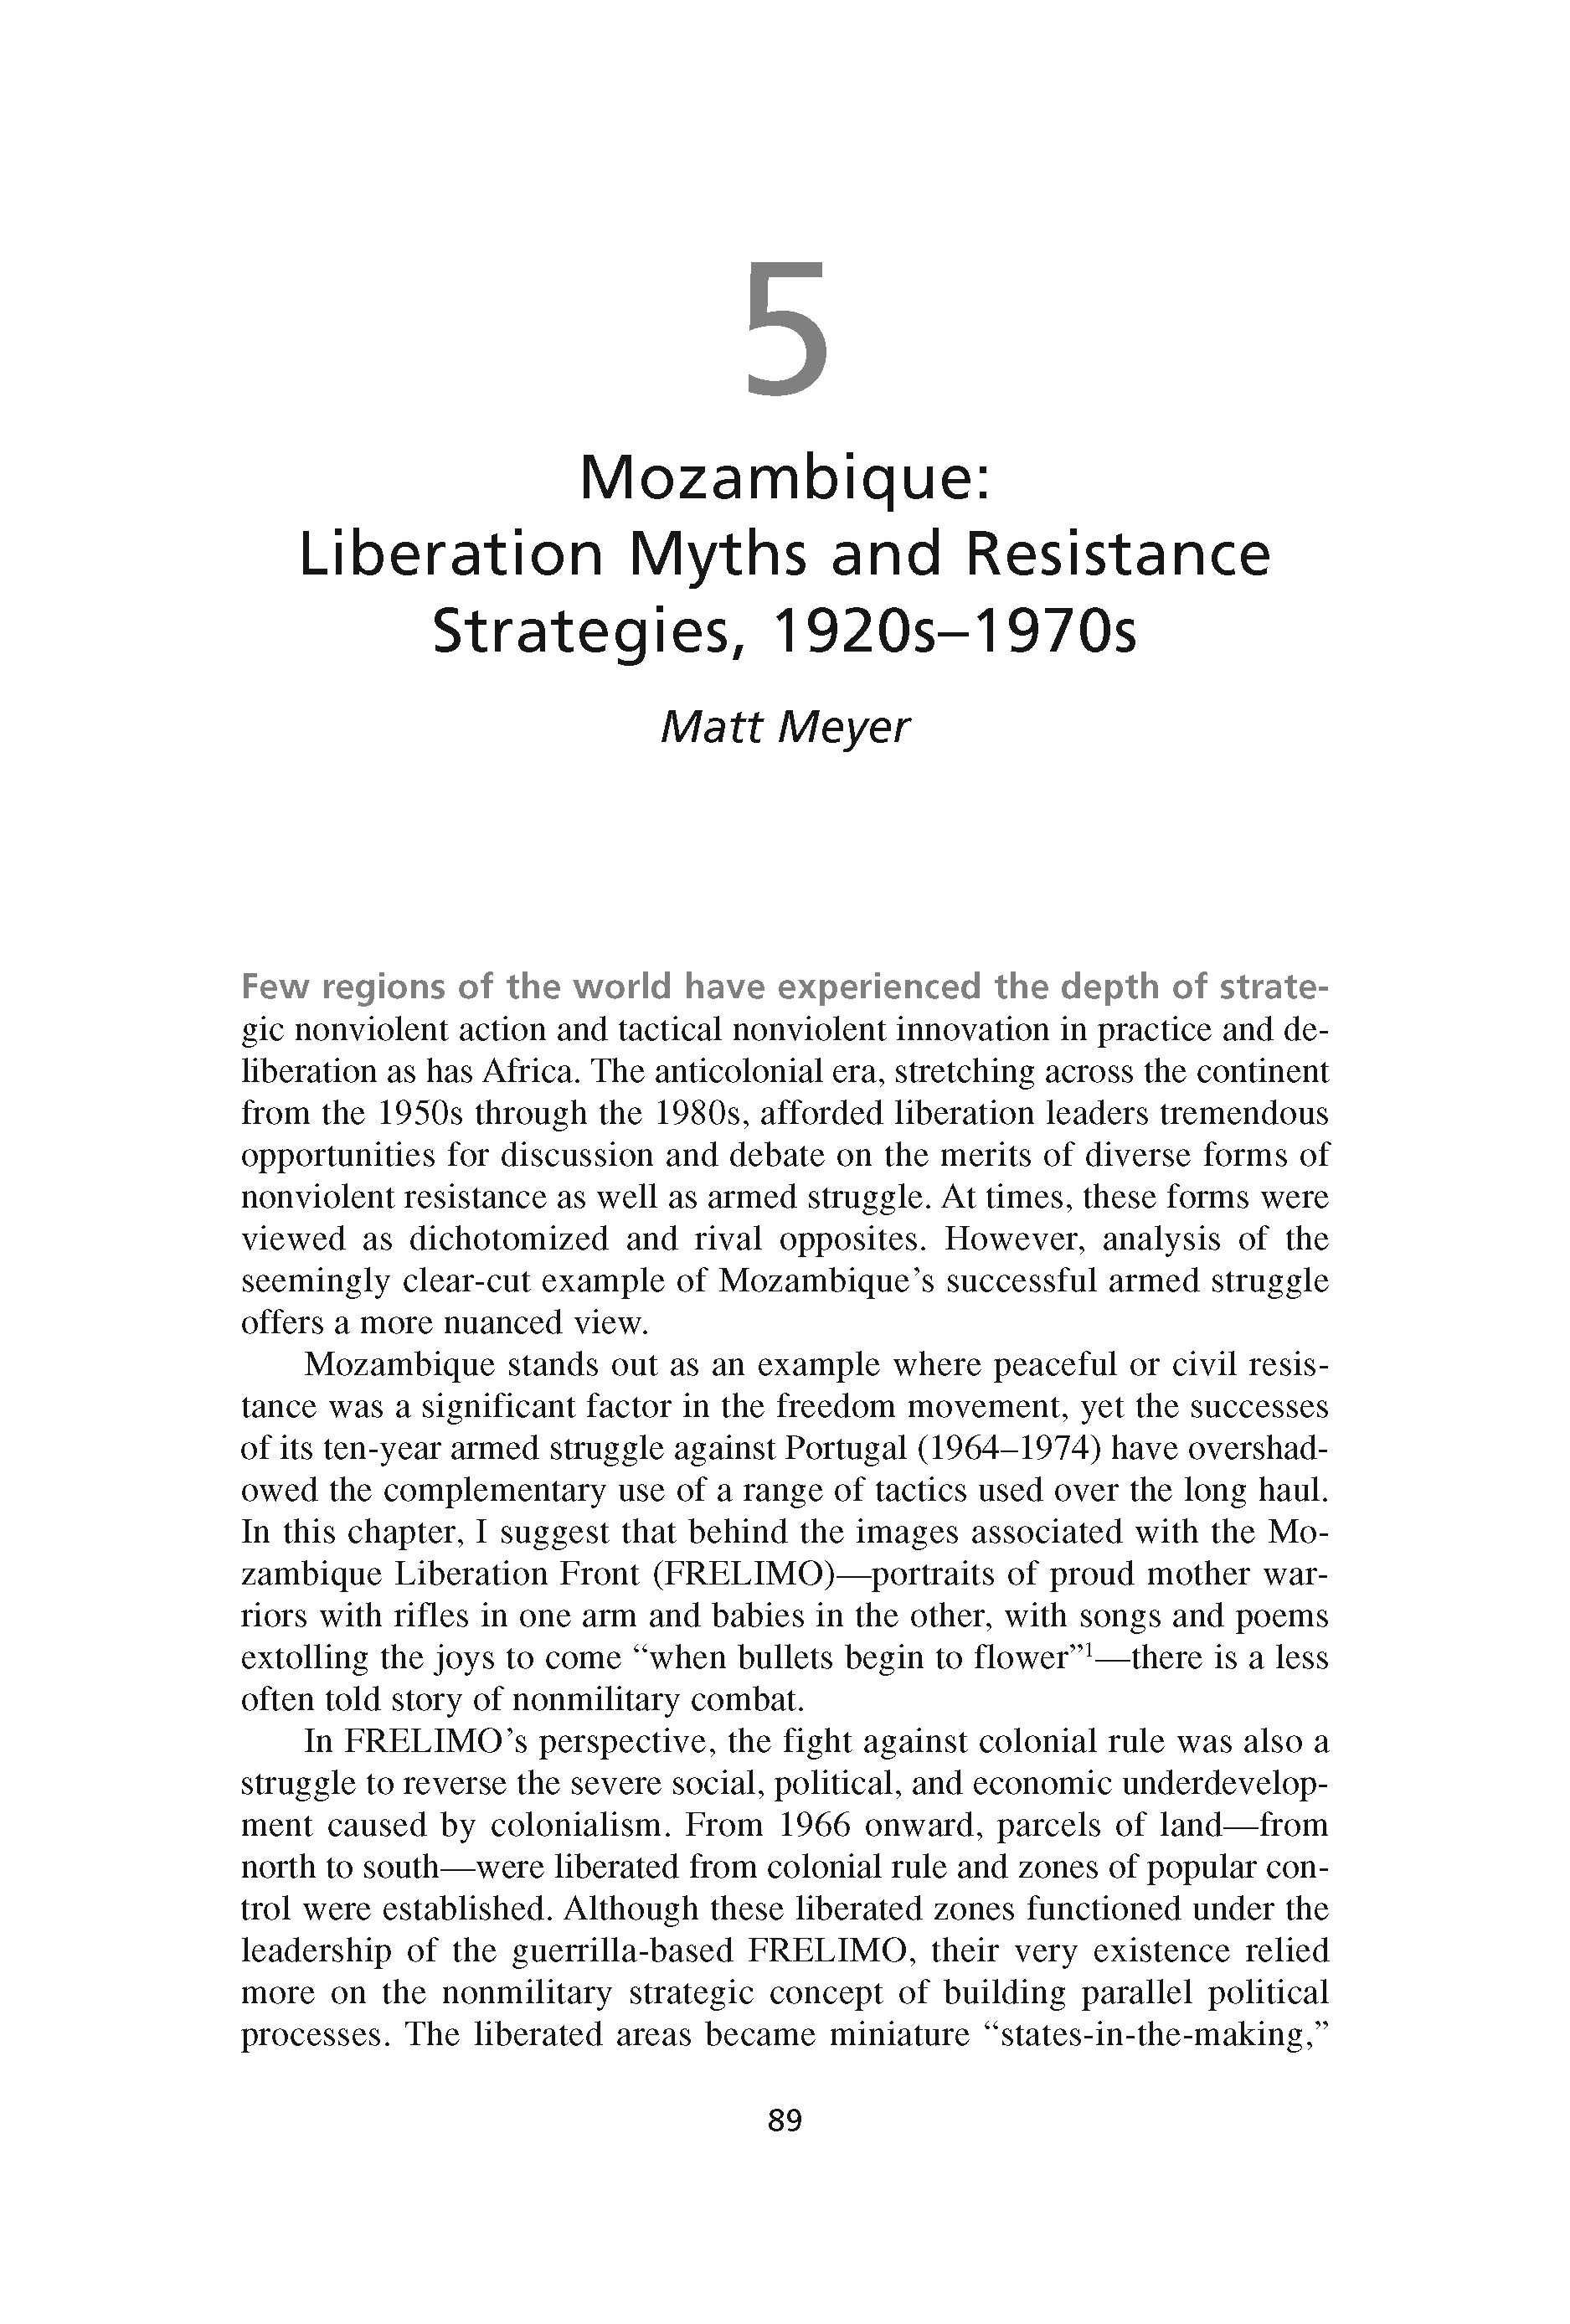 Mozambique: Liberation Myths and Resistance Strategies, 1920s-1970s (Chapter 5 from ‘Recovering Nonviolent History’)